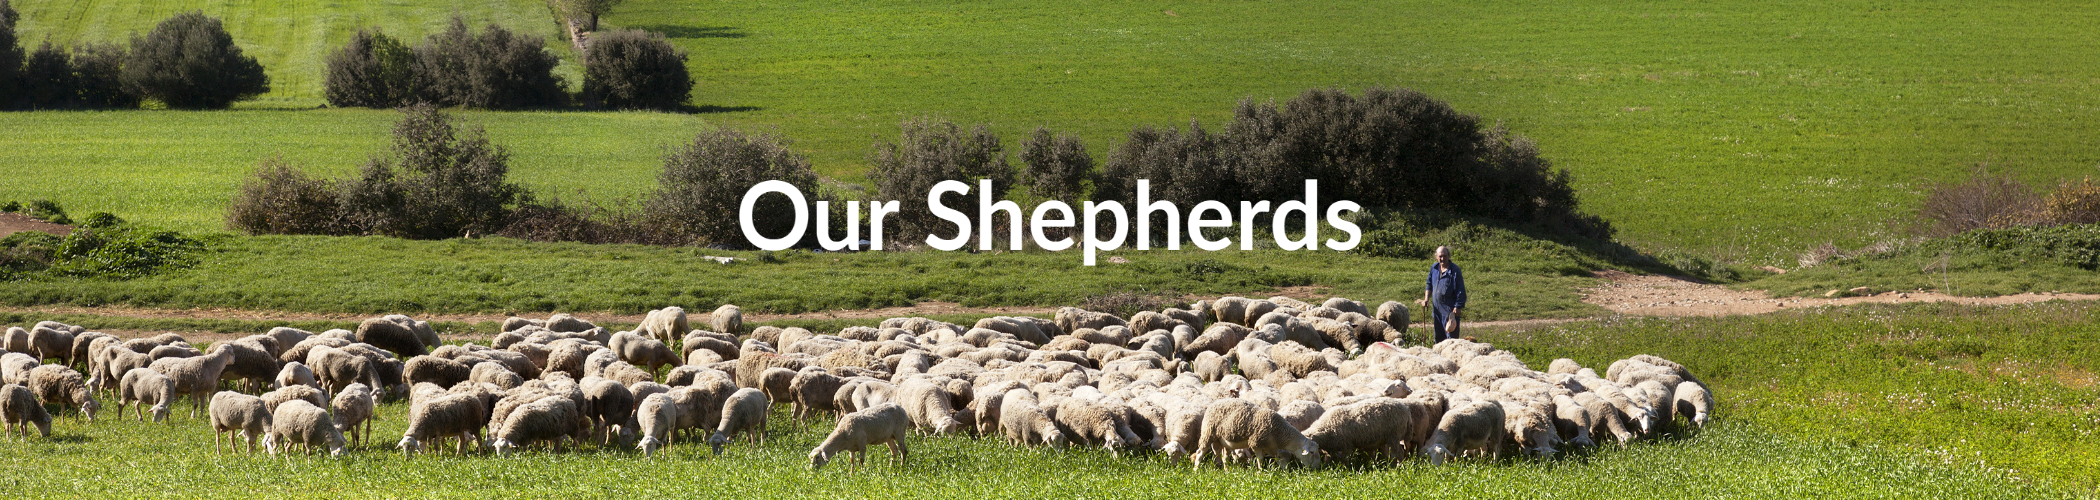 Our Shepherds and Elders